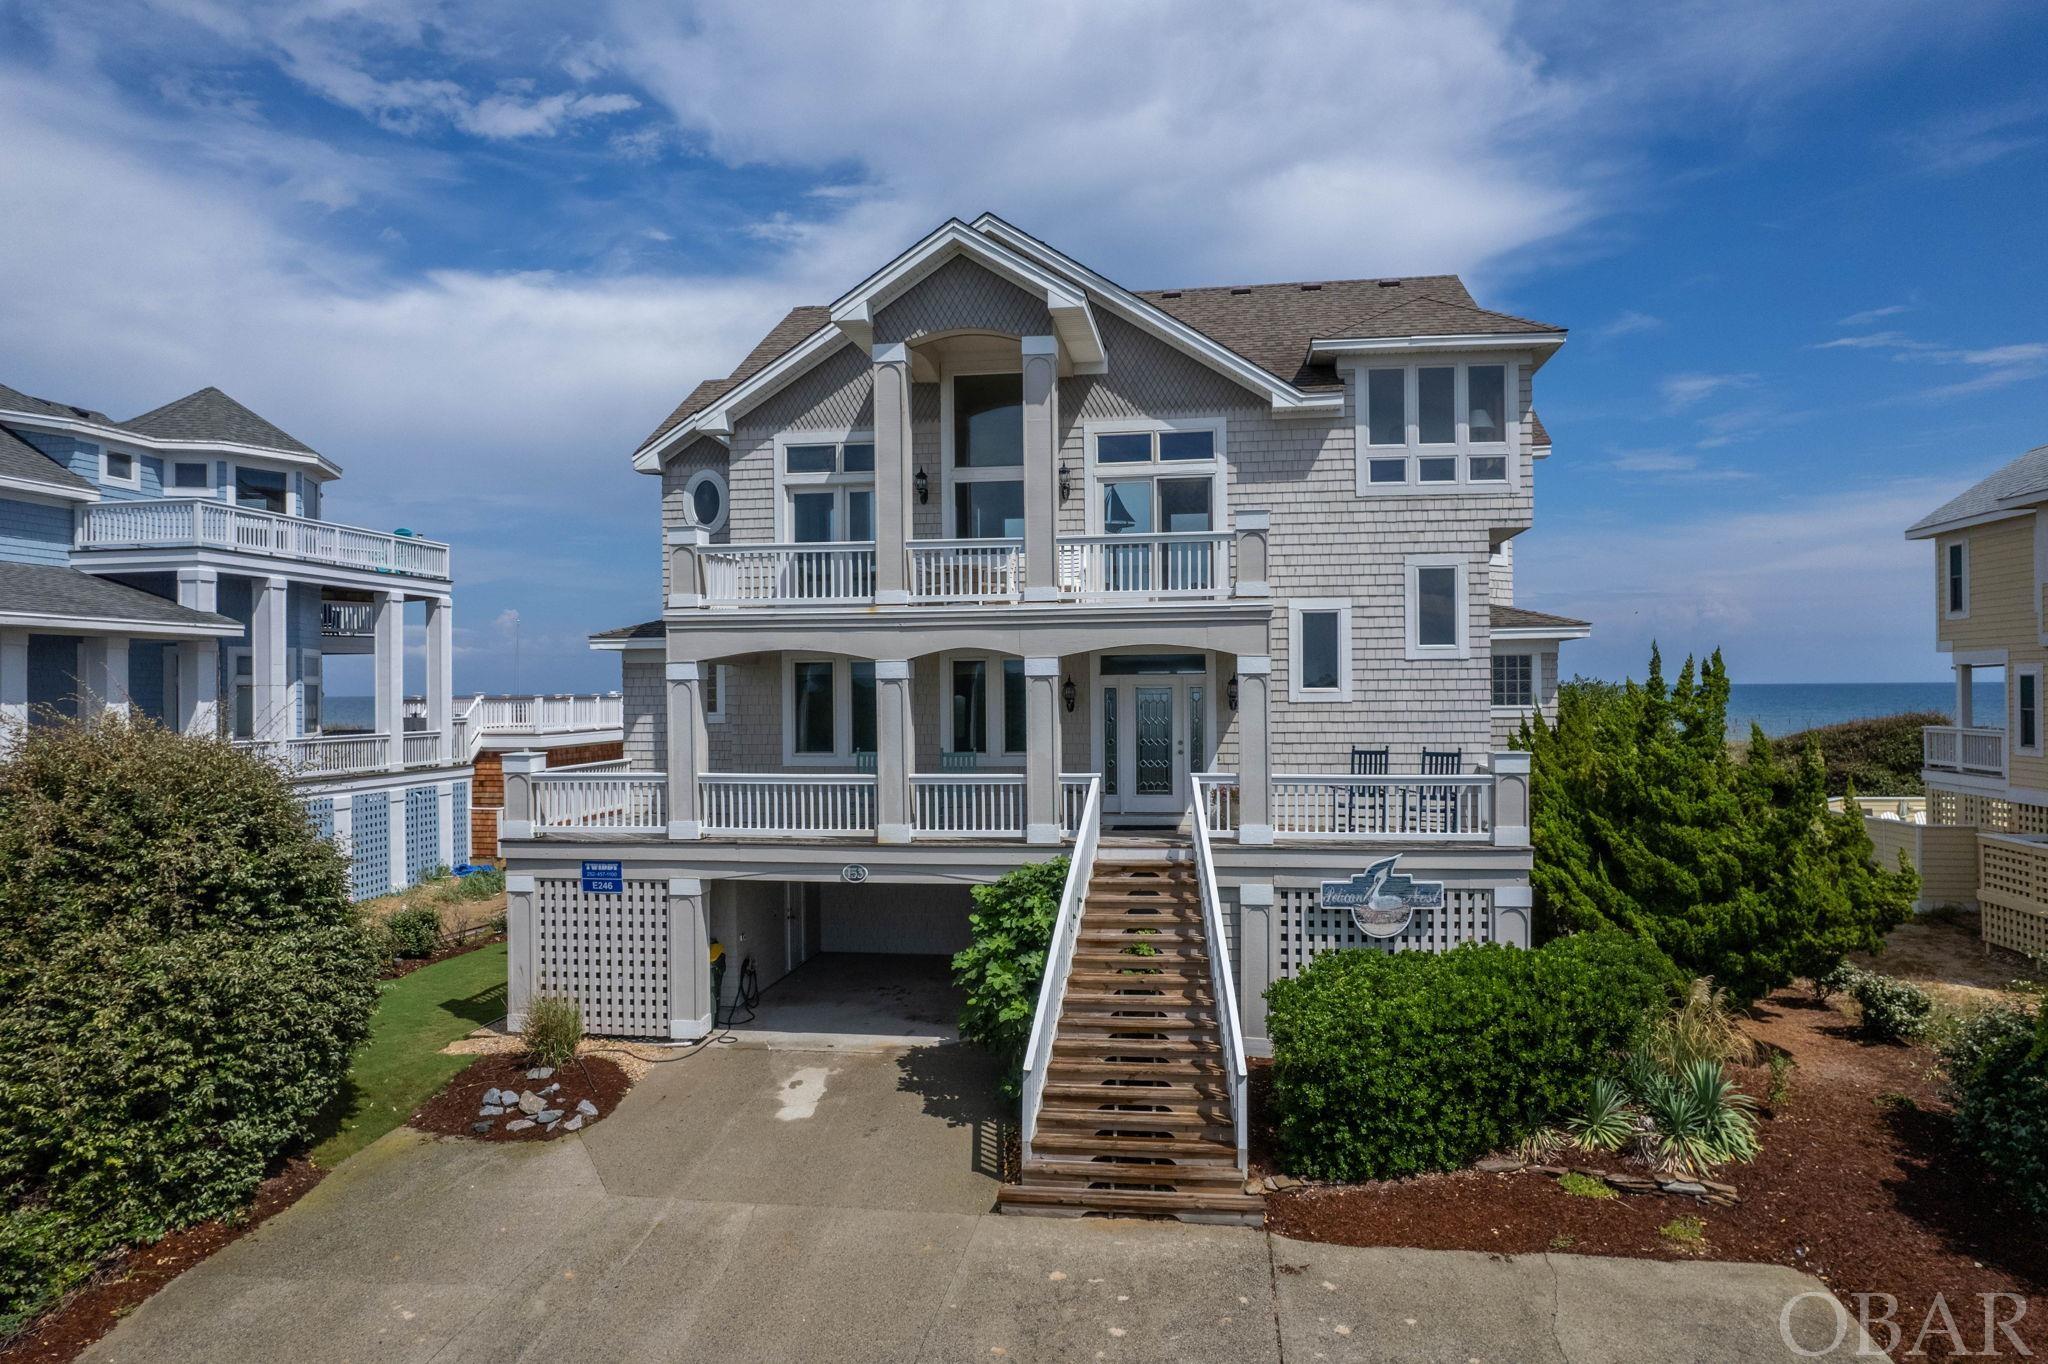 Gorgeous Oceanfront in one of most unique areas of Pine Island.  Ocean and Sounds views and practically private beaches await you at this 6 Bedroom, 5.5 Bath oceanfront retreat.  Ground floor has 3 bedrooms, 2 baths and generous game room with pool table and arcade, along with the laundry room.  Second floor has 3 spacious primary suites, two of which have ocean views.  You also have a main foyer and sitting area with ocean views and covered porches.  The main living area is all open kitchen, dining and living room with wet bar and ships watch.  The views from here are all water--spectacular!